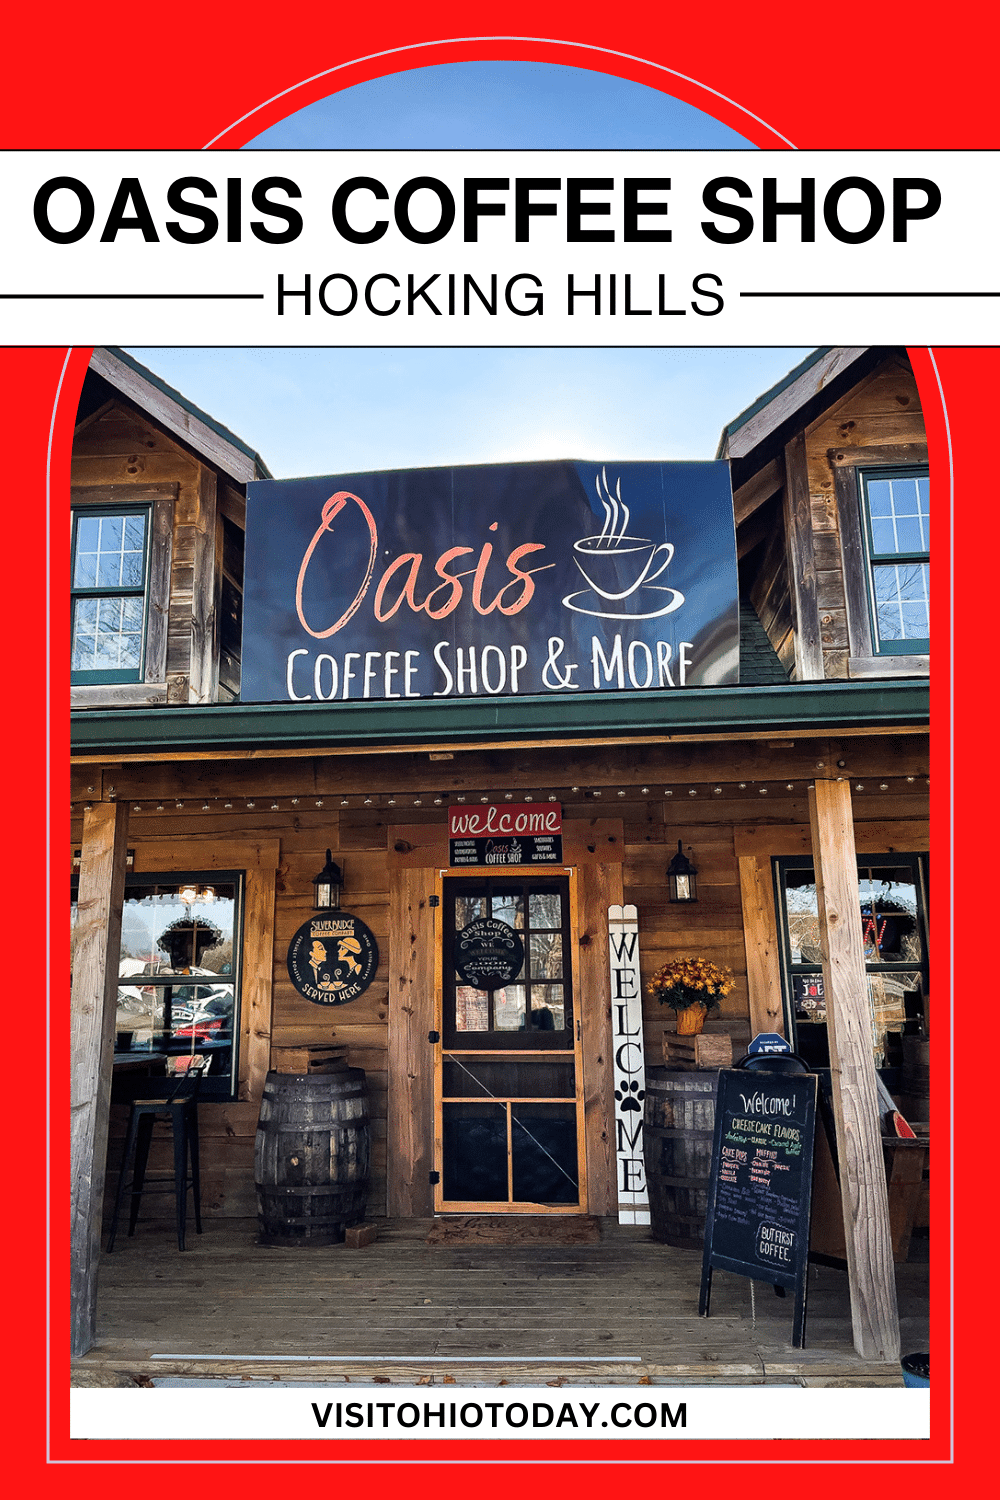 Oasis Coffee Shop is a cozy cafe with a mini golf course attached, nestled in Hocking Hills.